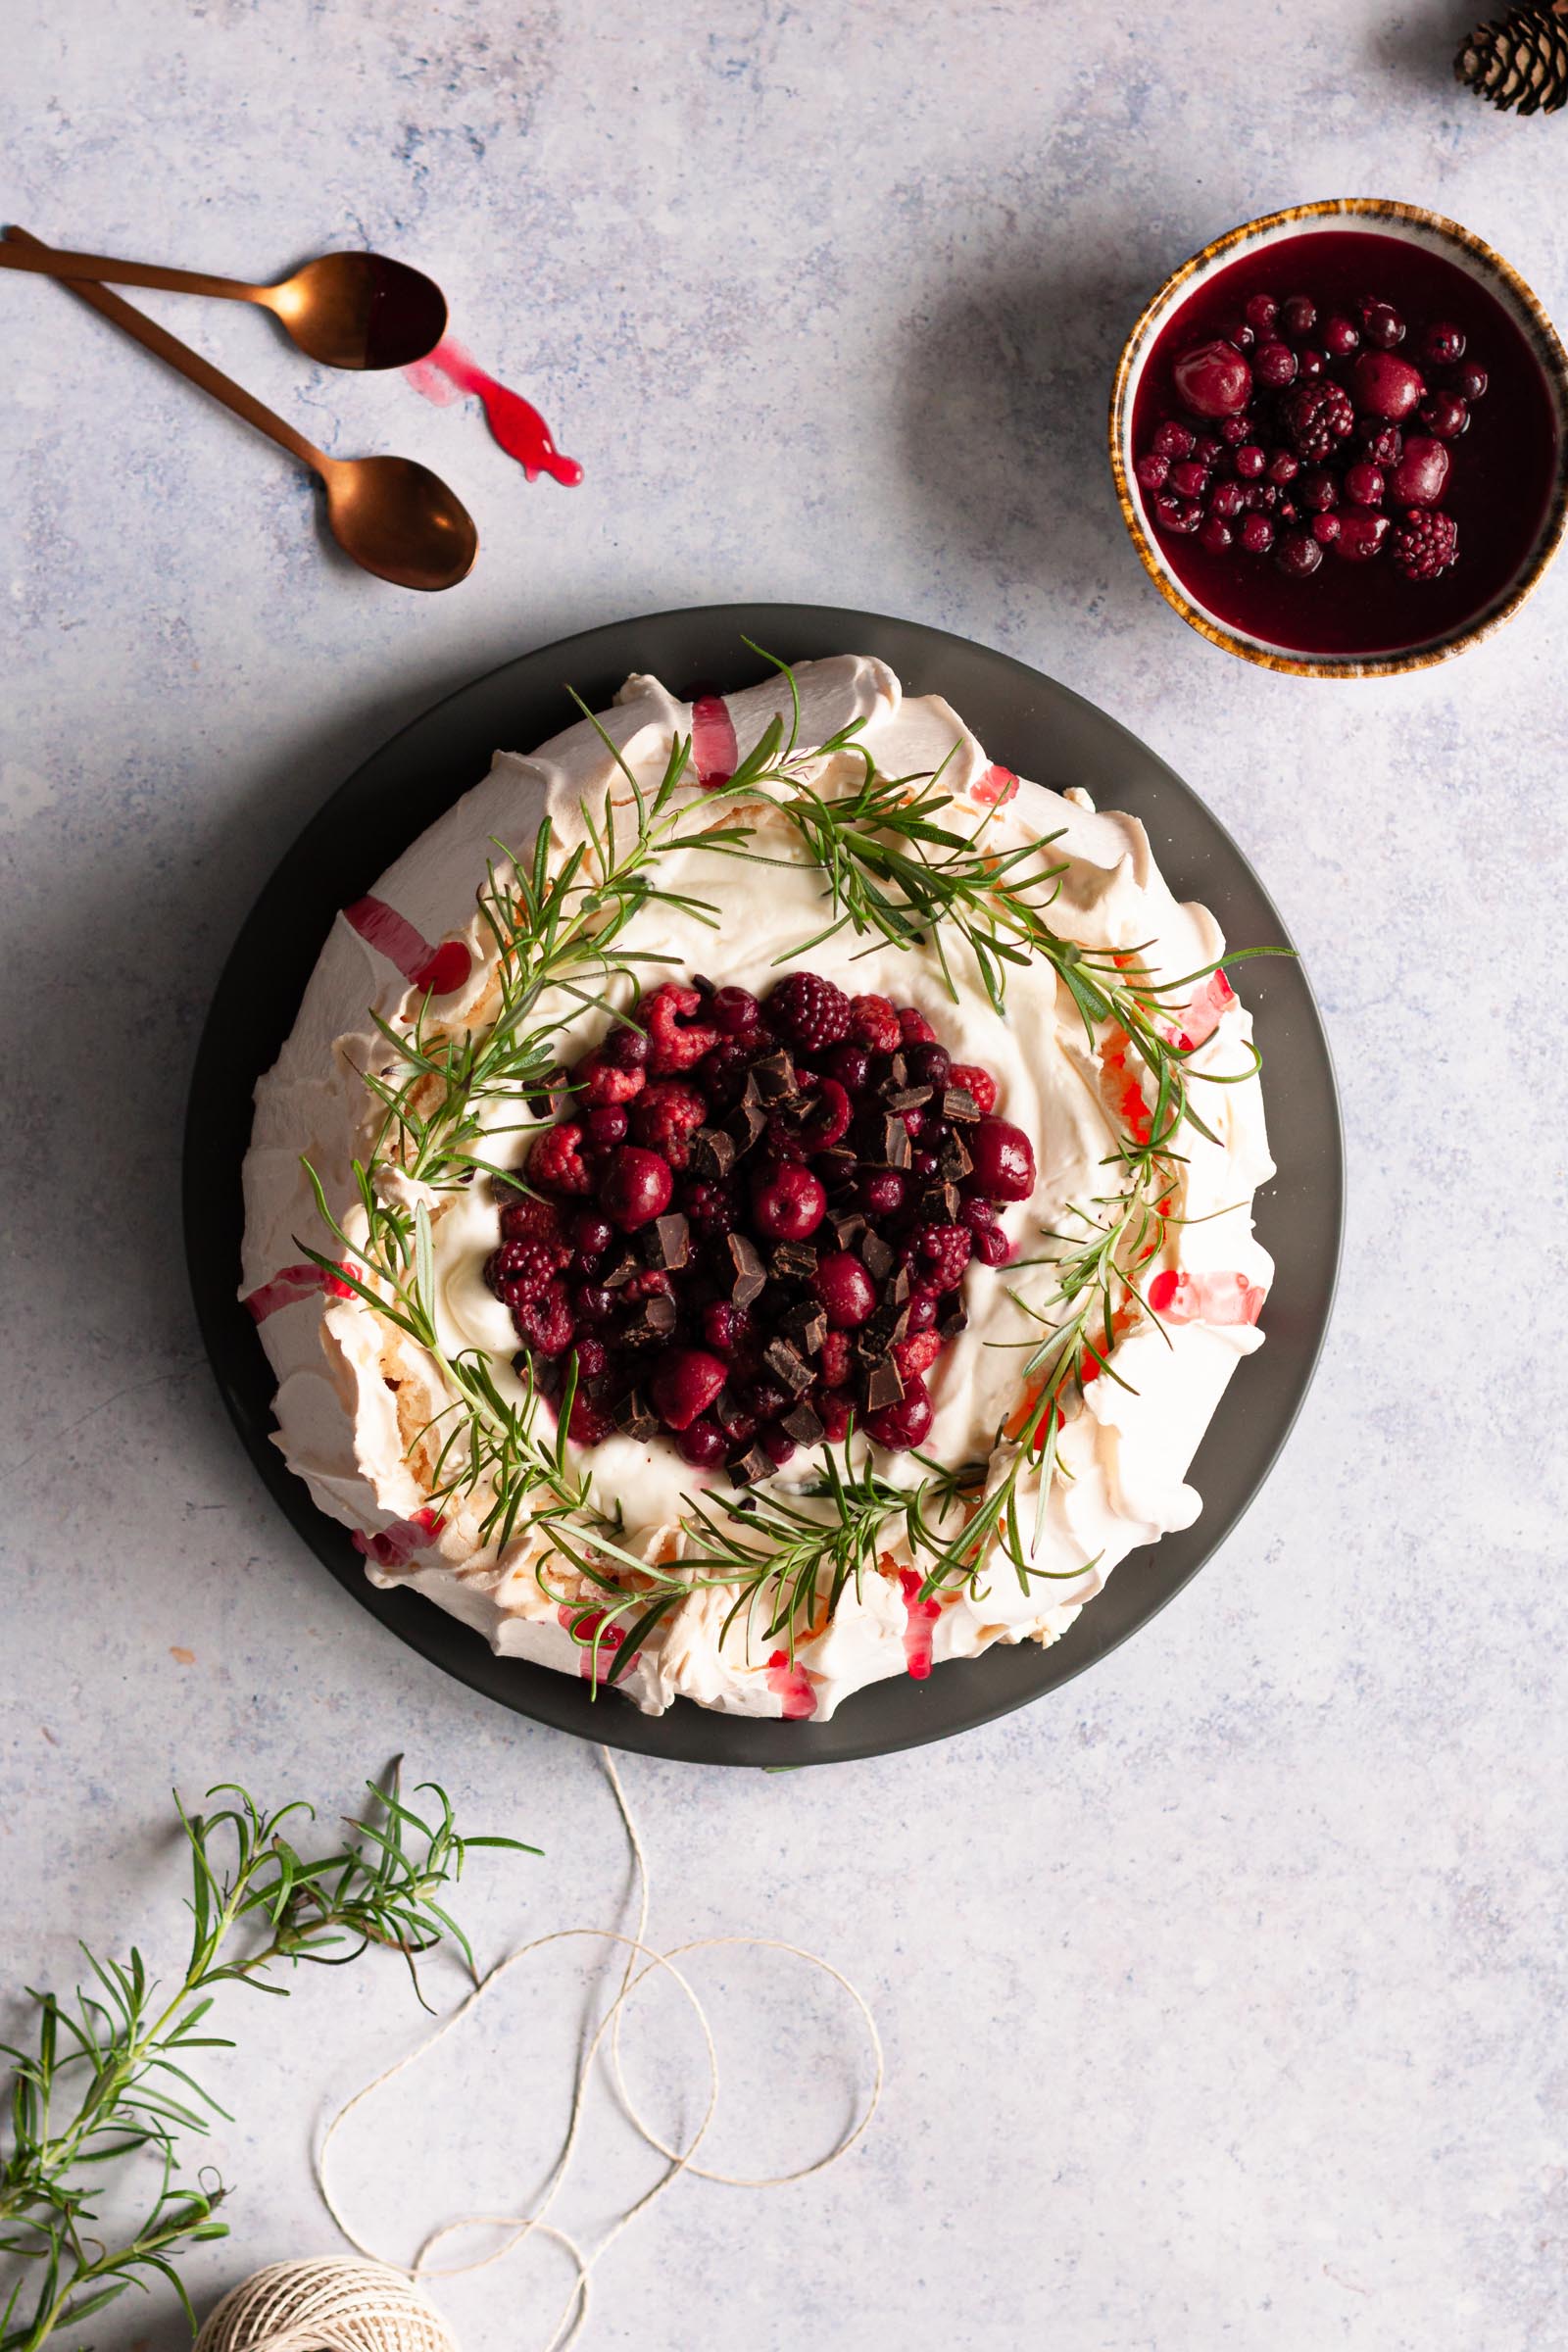 You are currently viewing How to Make an Easy Christmas Pavlova